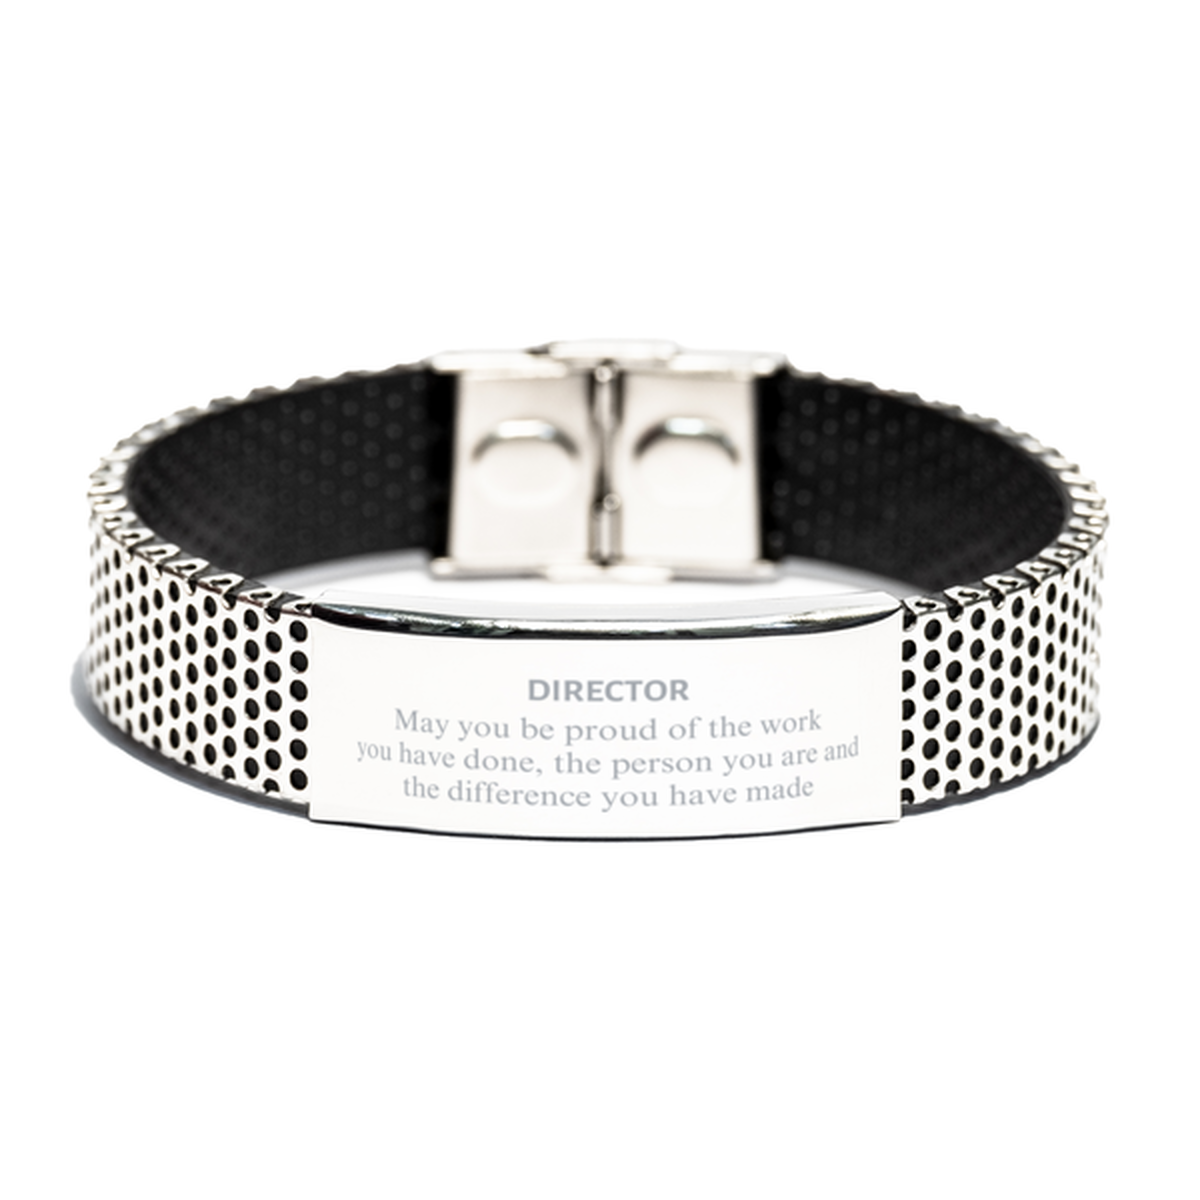 Director May you be proud of the work you have done, Retirement Director Stainless Steel Bracelet for Colleague Appreciation Gifts Amazing for Director